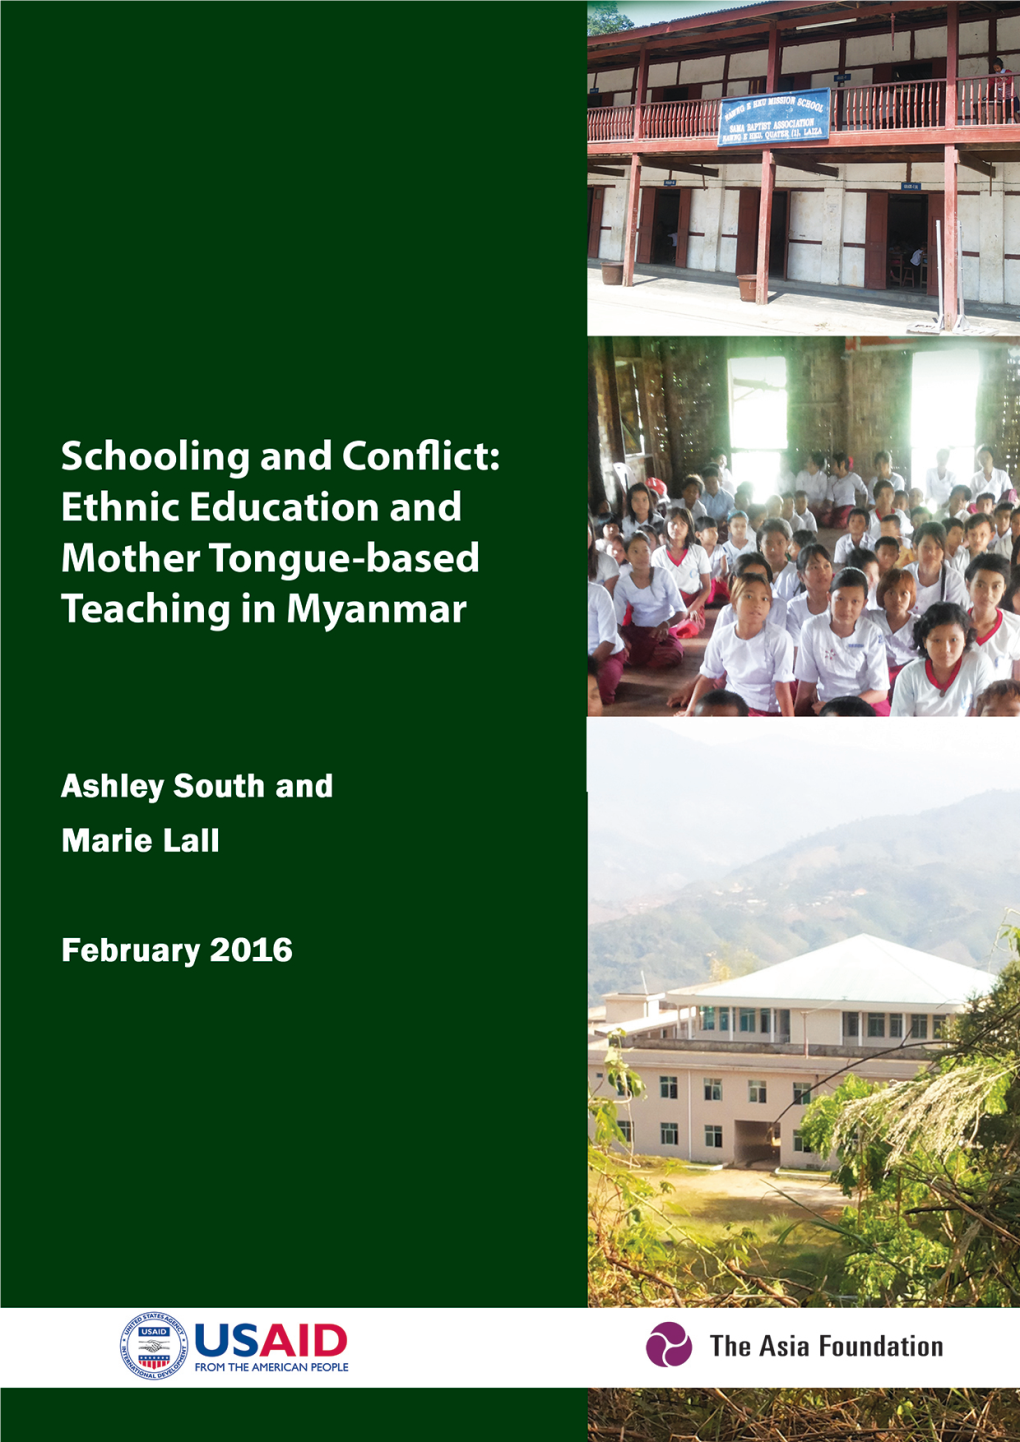 Ethnic Education and Mother Tongue-Based Teaching in Myanmar